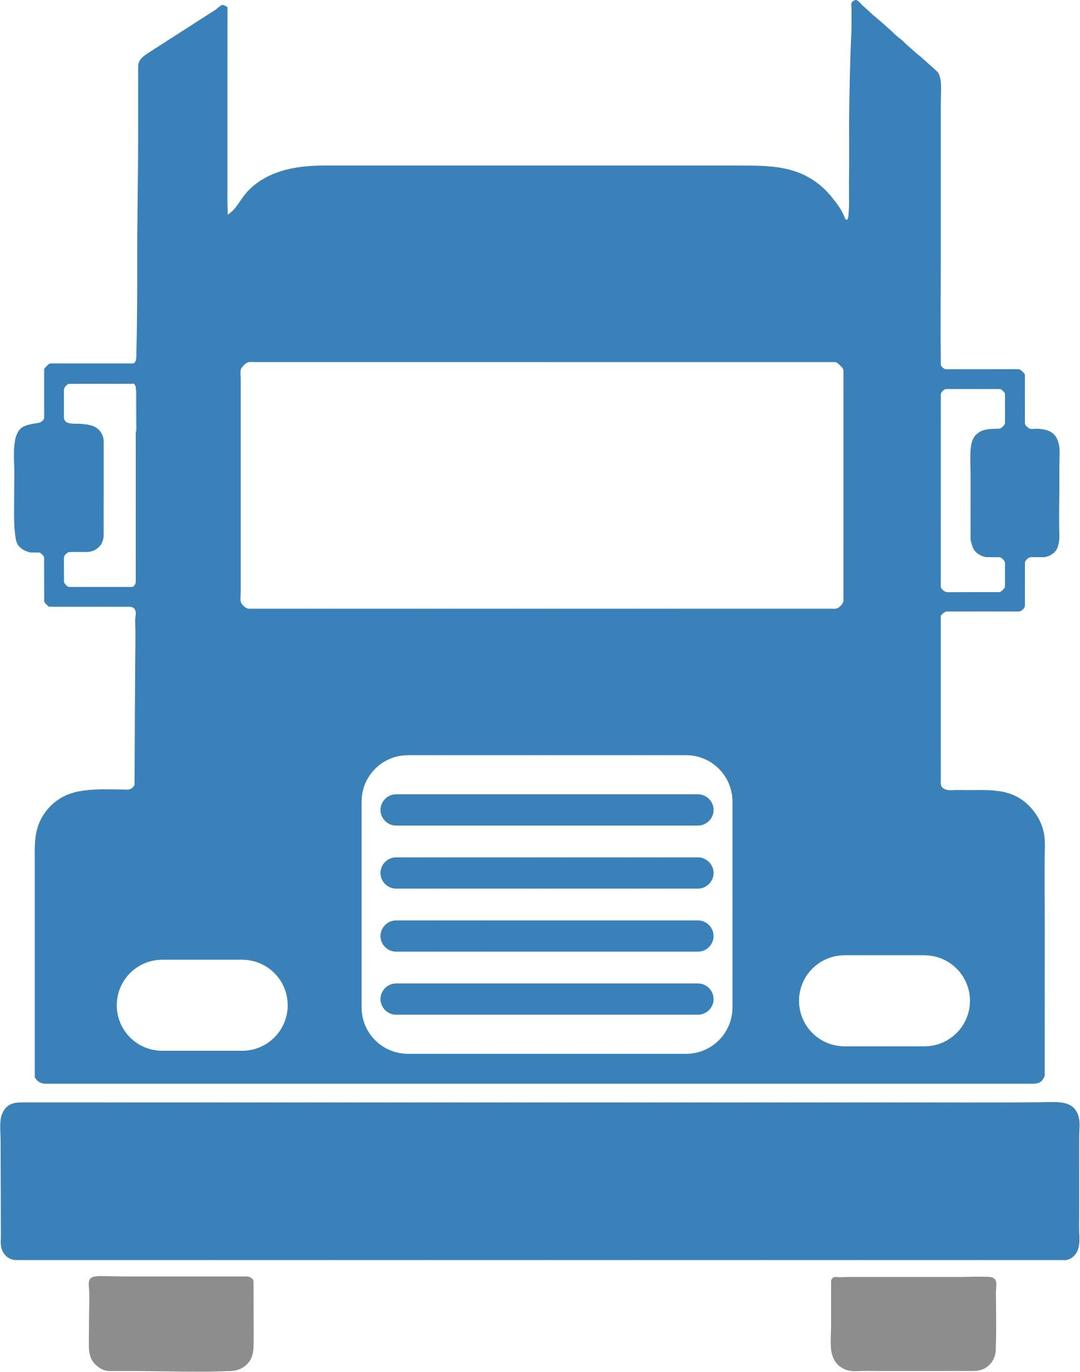 Front Facing Truck Vectorized png transparent